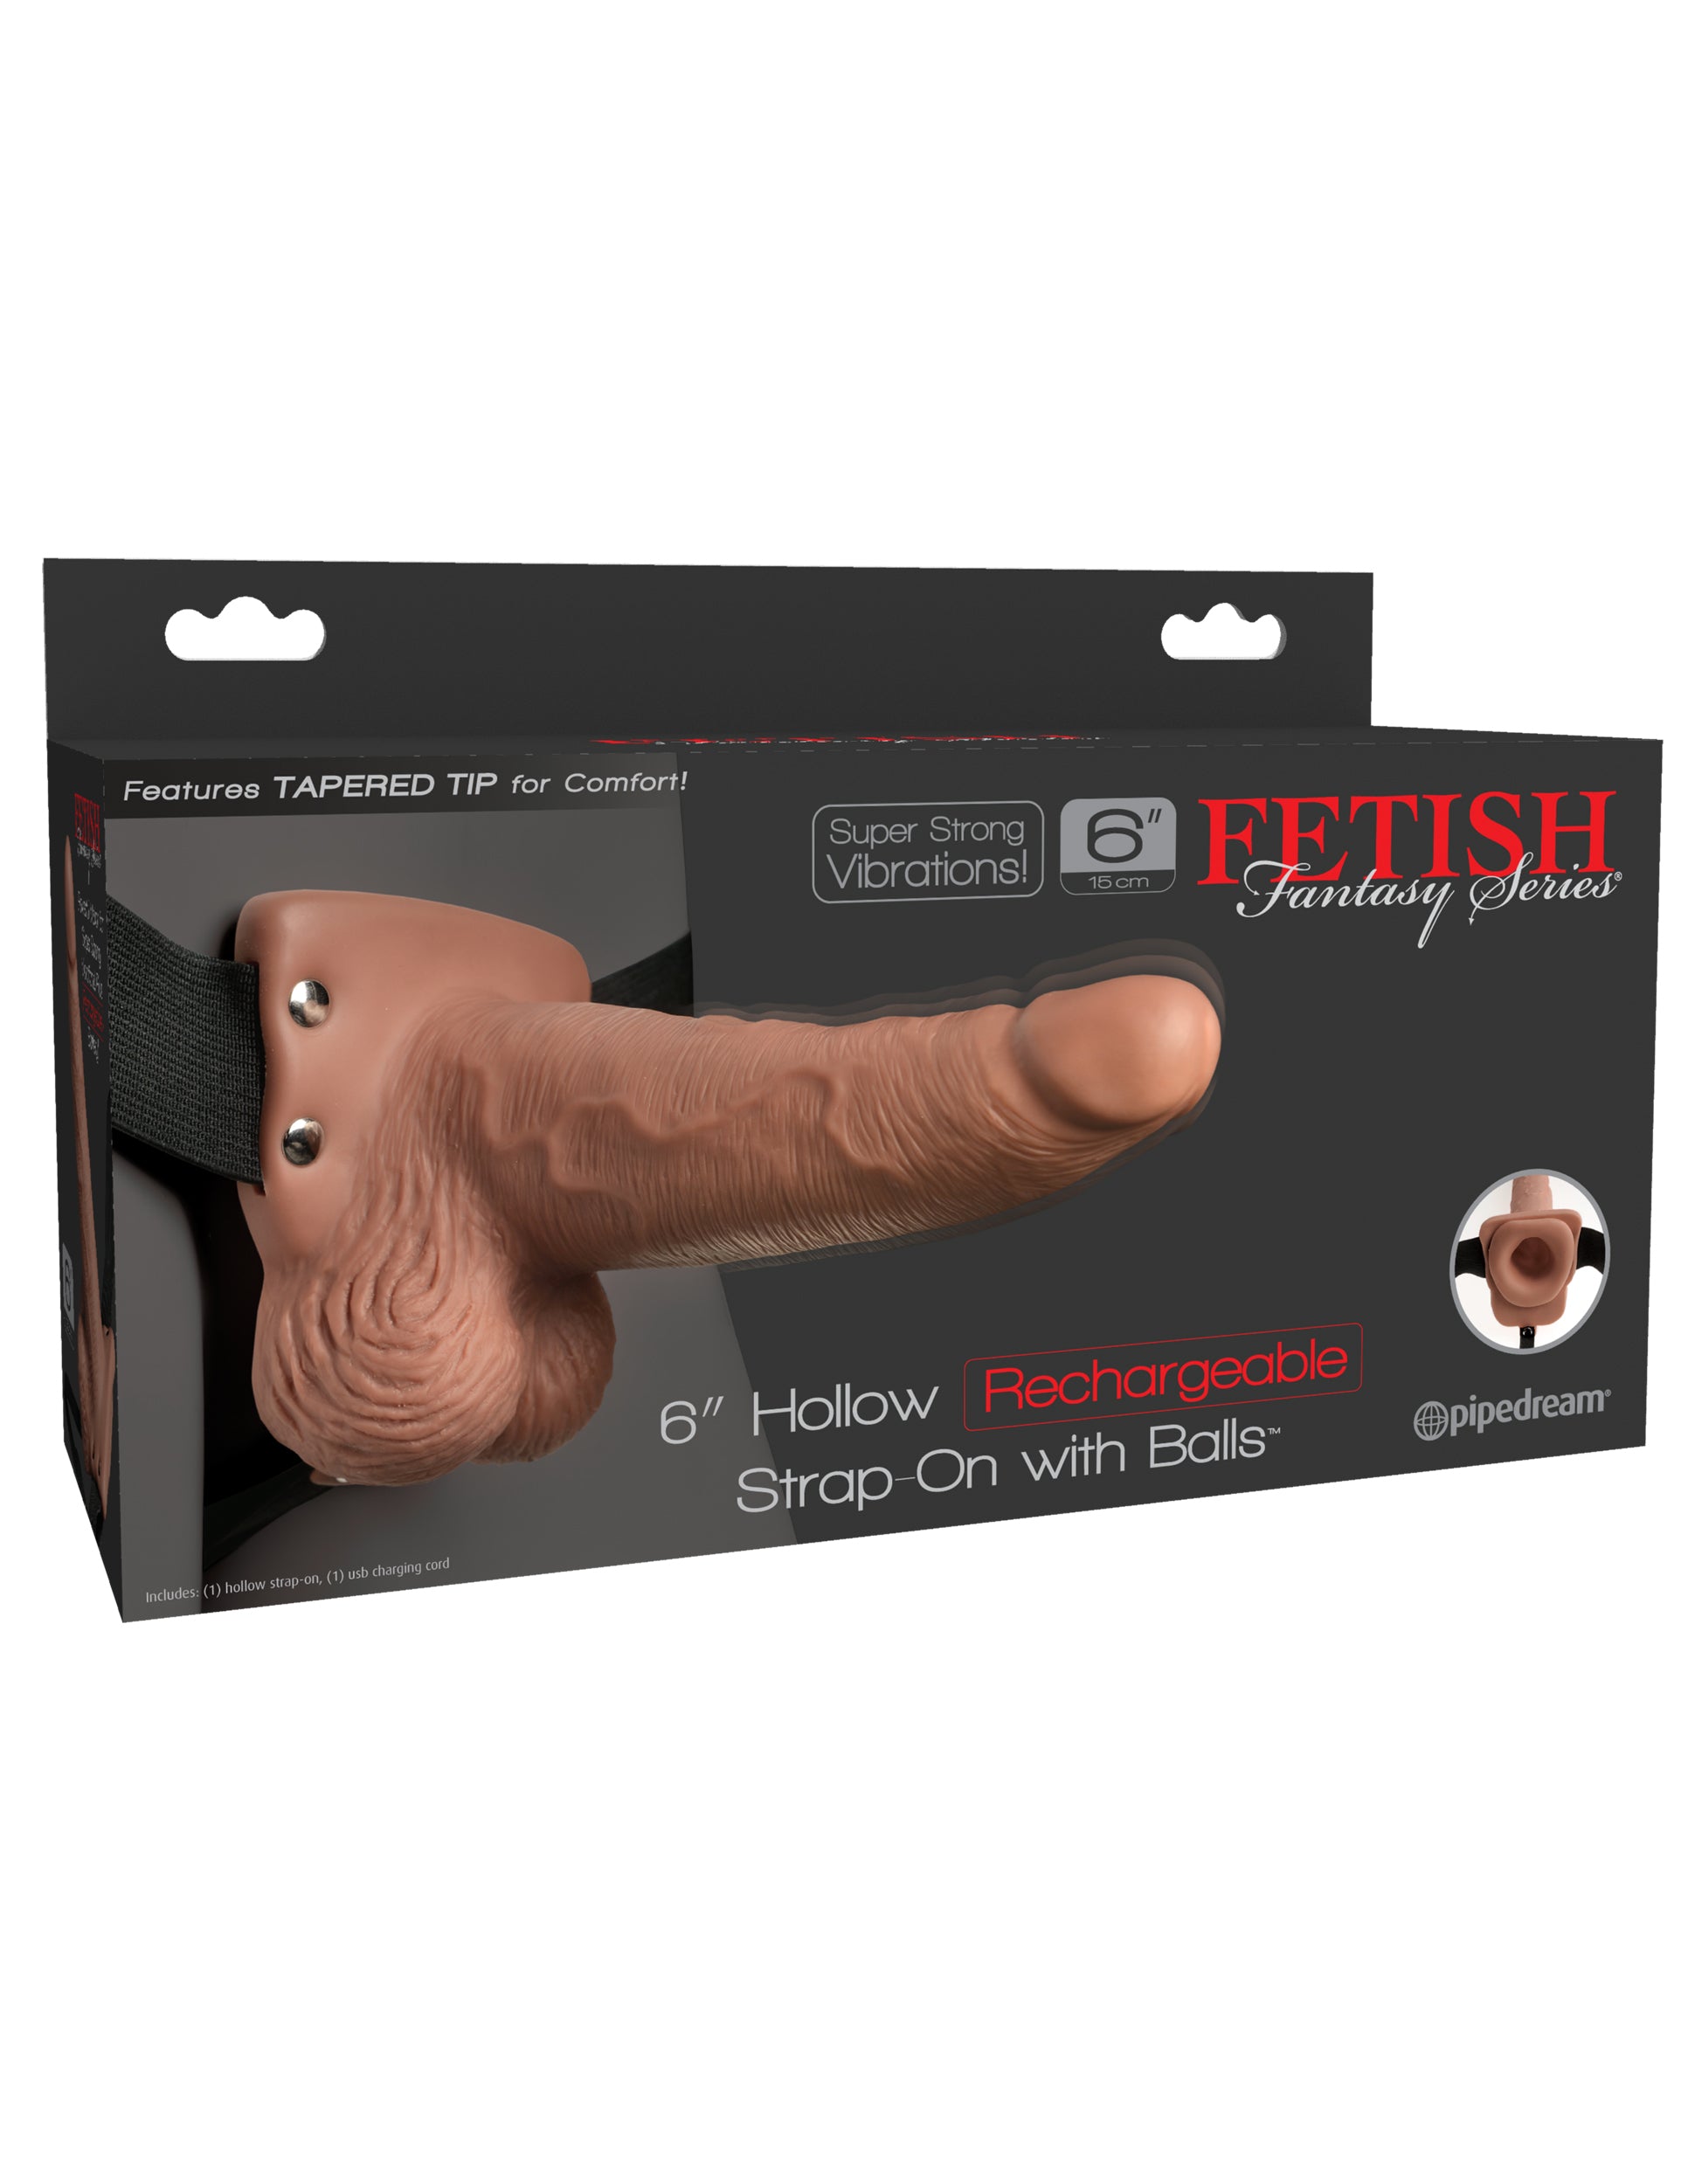 Fetish Fantasy Series 6&quot; Hollow Rechargeable Strap-on With Balls - Tan